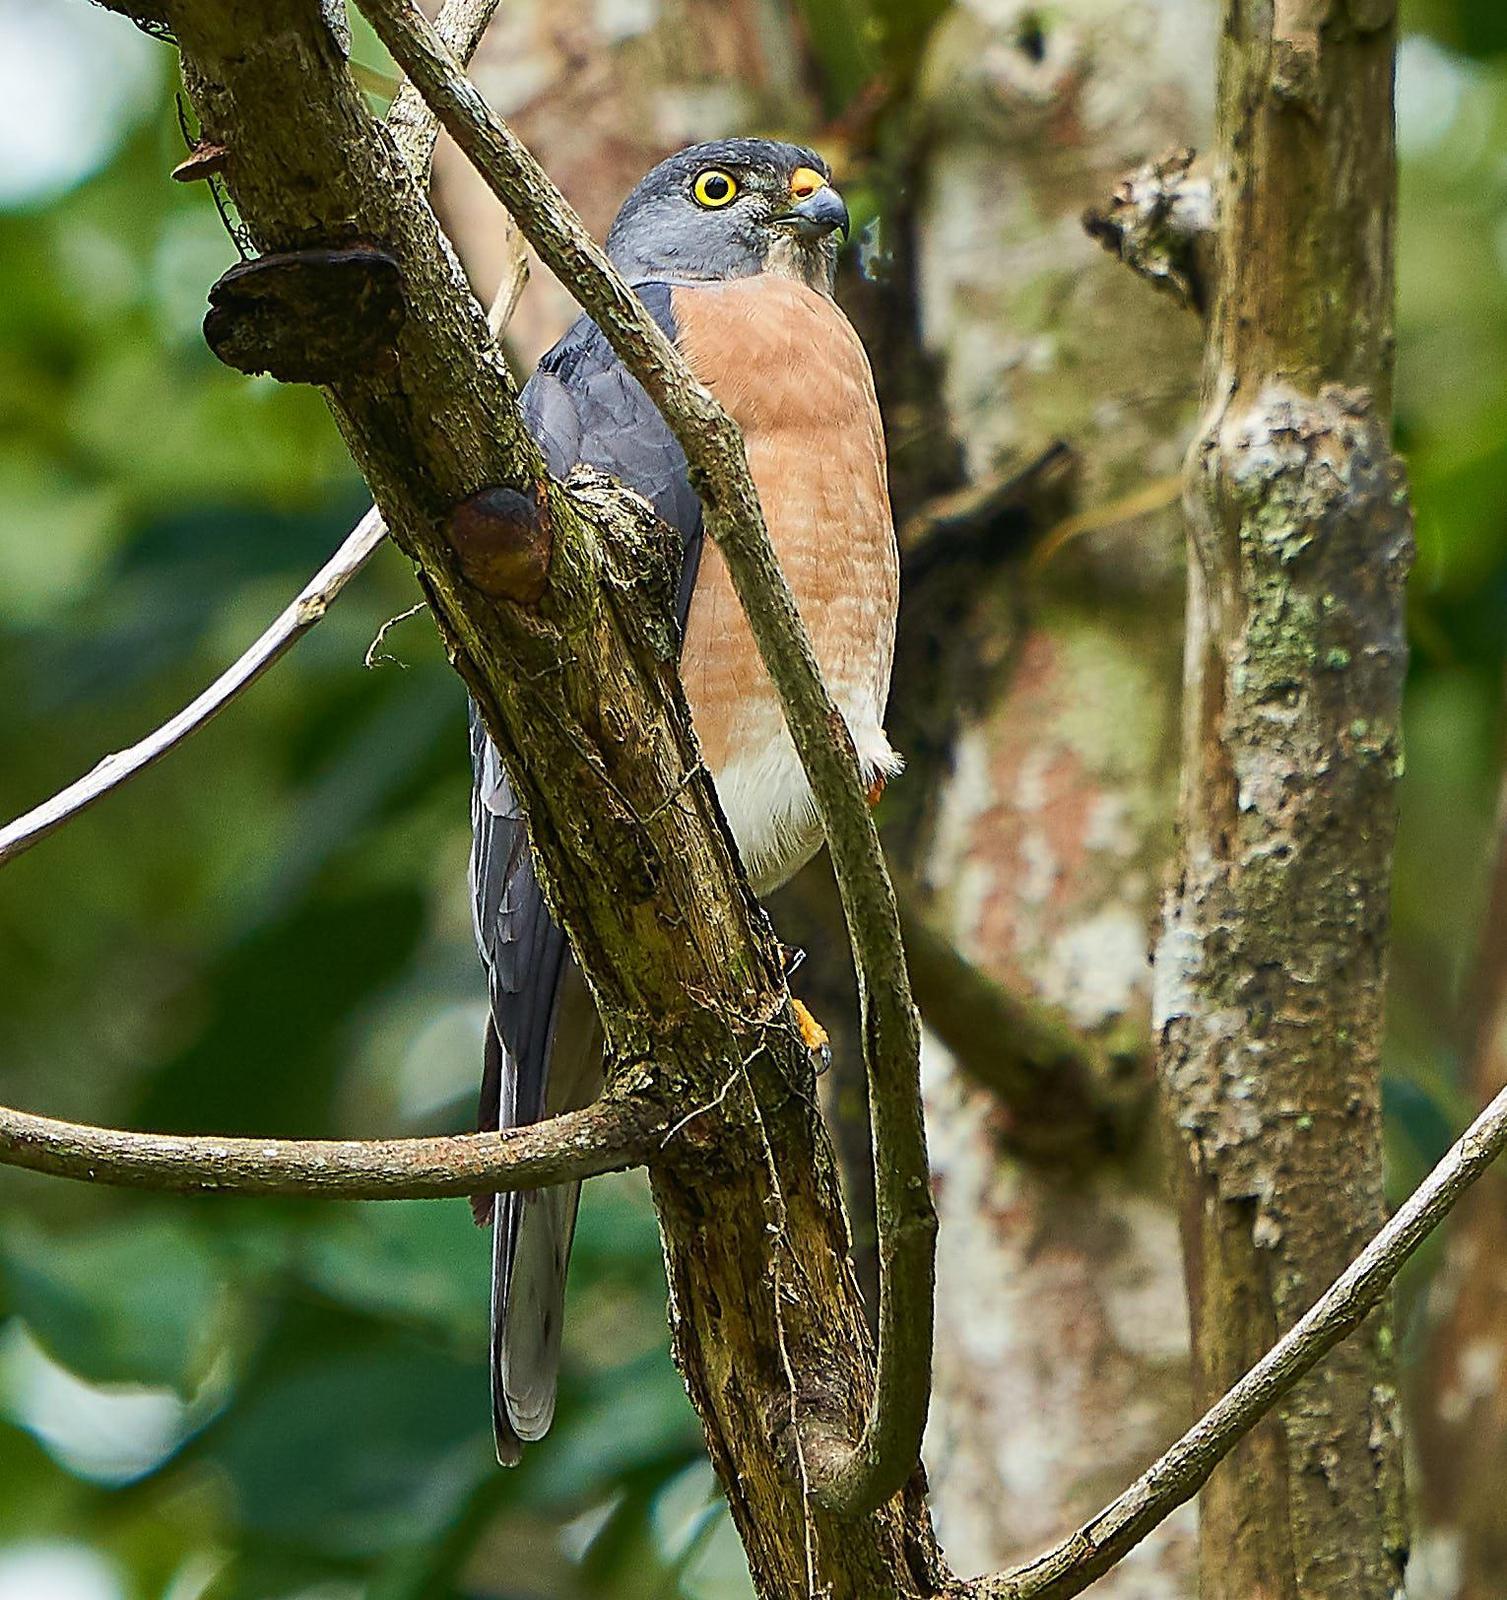 Chinese Sparrowhawk Photo by Steven Cheong